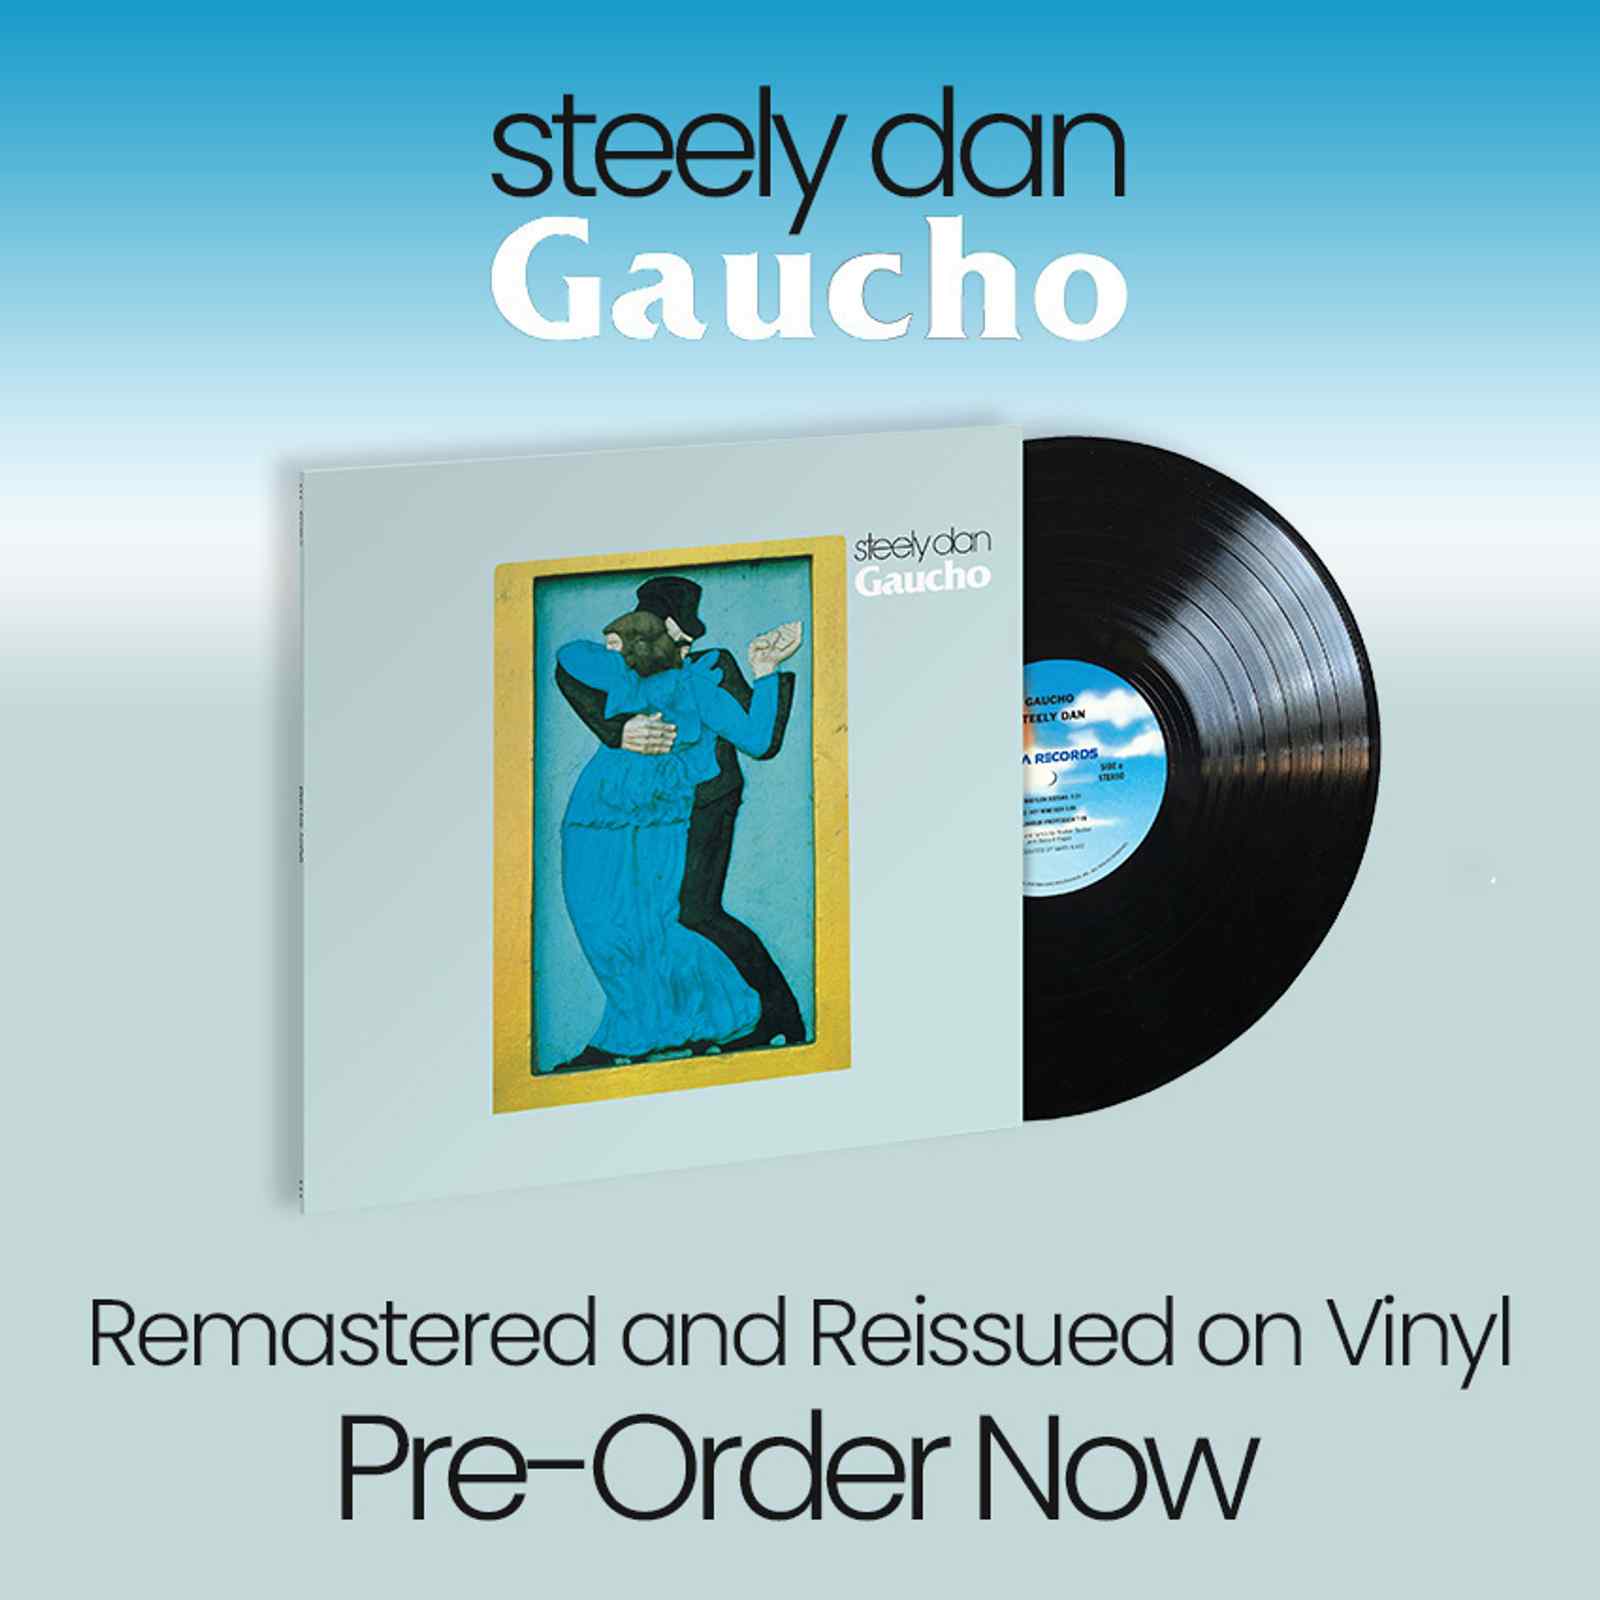 Gaucho LP Available for Pre-Order Now